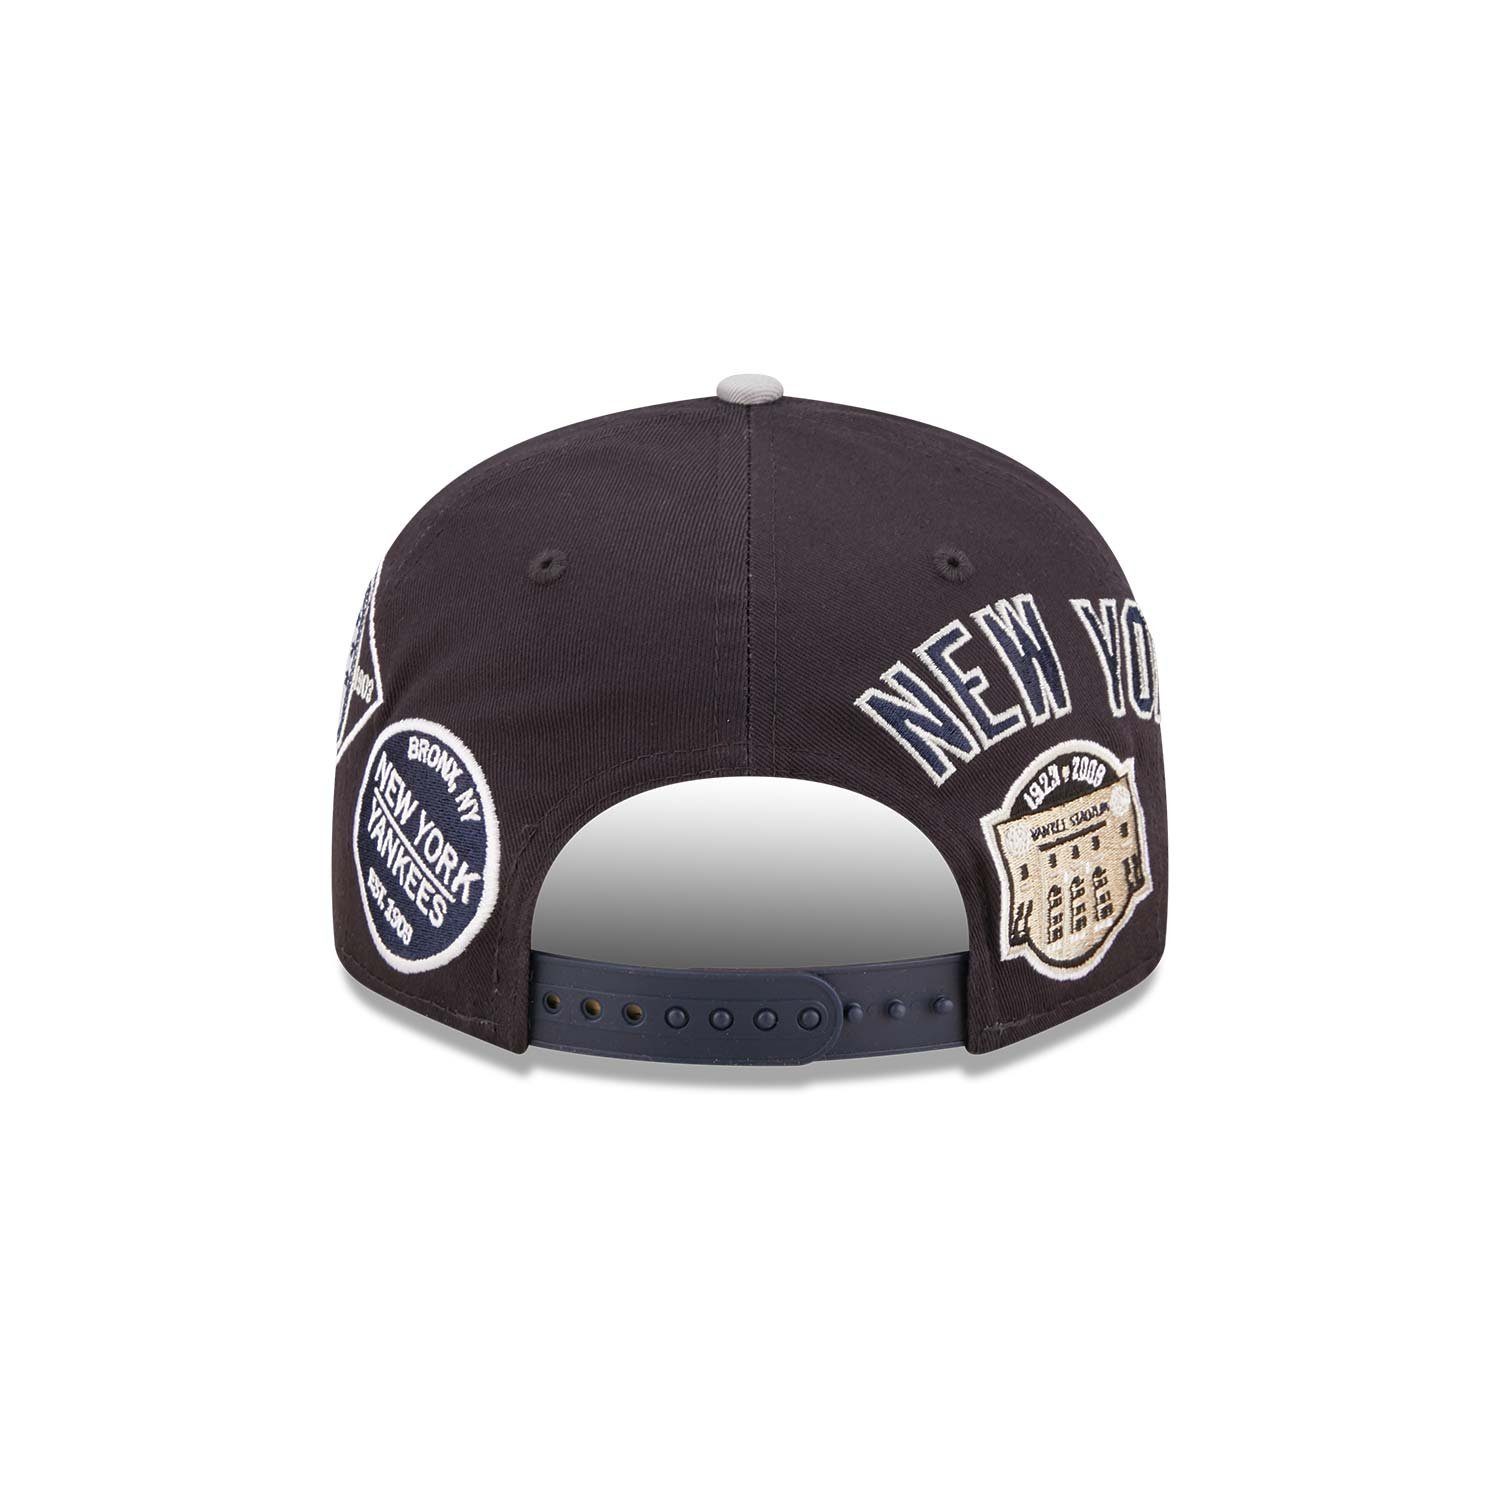 New Era 9FIFTY York Patches Baseball Cap Over All Yankees New